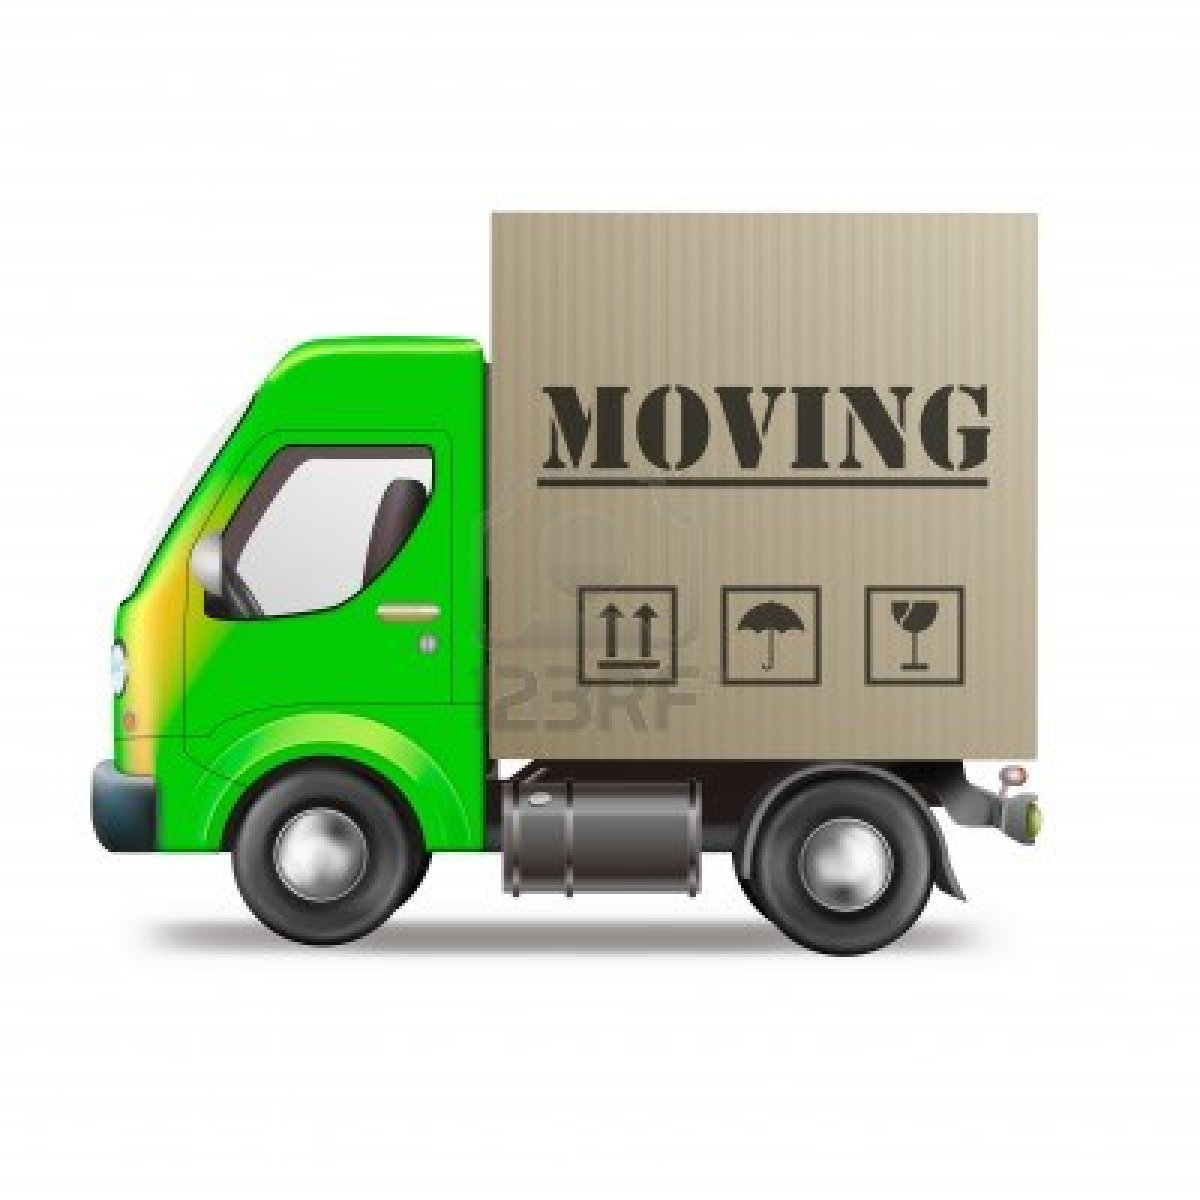 Cypress Movers